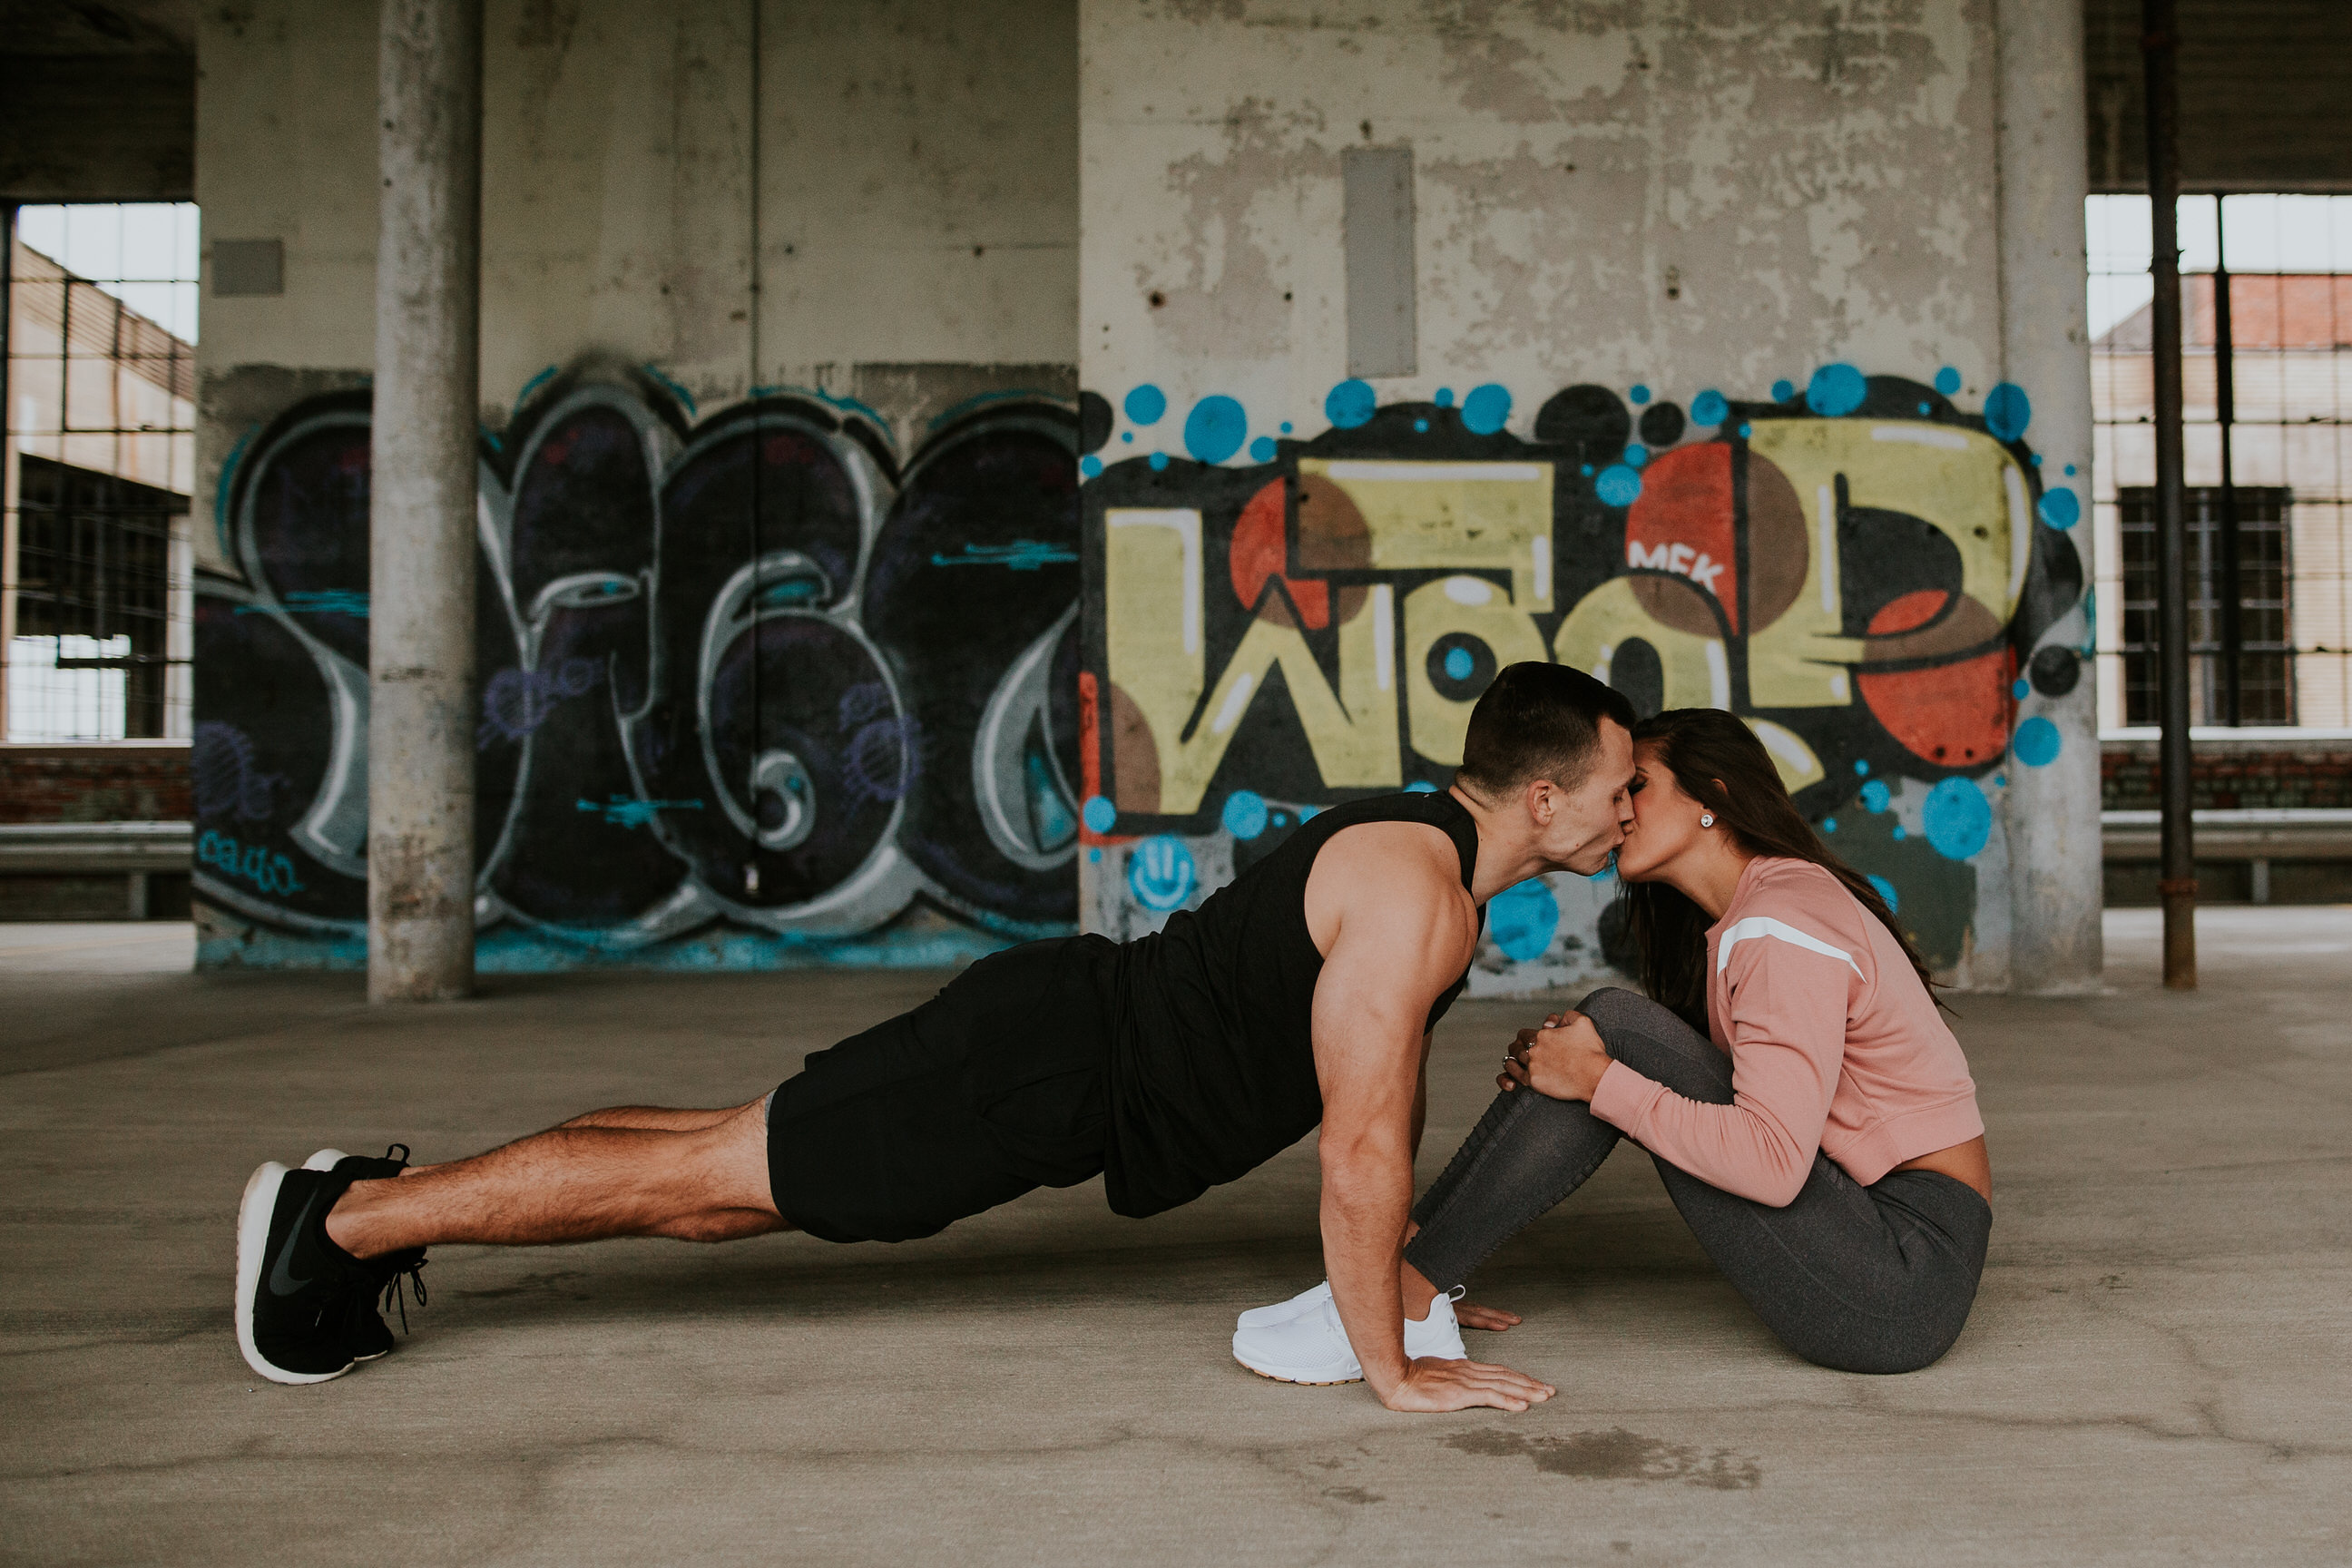 fitness couples, fit couples, fit couples goals, a southern drawl boyfriend, nike crop pullover, alo yoga moto leggings, alo moto leggings, nike sweatshirt, nike air presto sneaker, lululemon sports bra, a southern drawl boyfriend, grace wainwright boyfriend, onzie sports bra, lululemon activewear, fitness couple, couple goals, fitness couple style, fit couples, fit couple goals, nike pro indy bra, athleisure, a southern drawl workouts, fall activewear, winter activewear, fit with asd videos, #fitwithasd, gym looks, trendy workout outfit, cute activewear outfit, a southern drawl workouts, weekly workout routine, weekly workouts, weekly exercises, polar a360 watch, cute activewear, cute workout outfit, running routine, girl gains, fitness inspiration, fitspo, nike athleisure outfit // grace wainwright a southern drawl